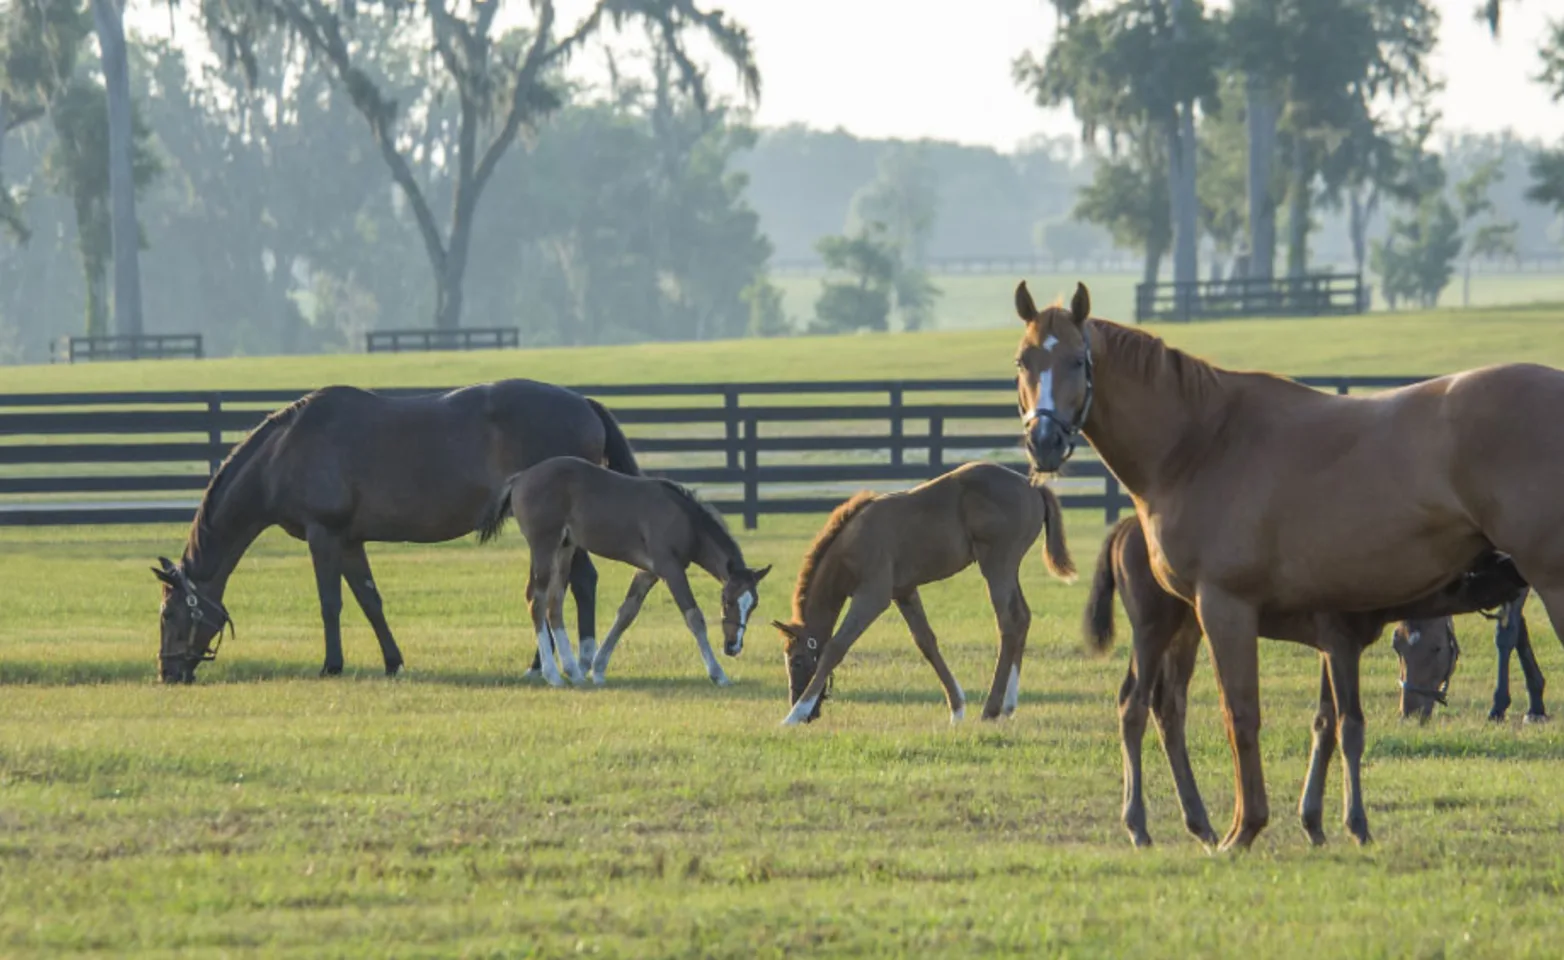 Mares and foals grazing in a closed grassy pen